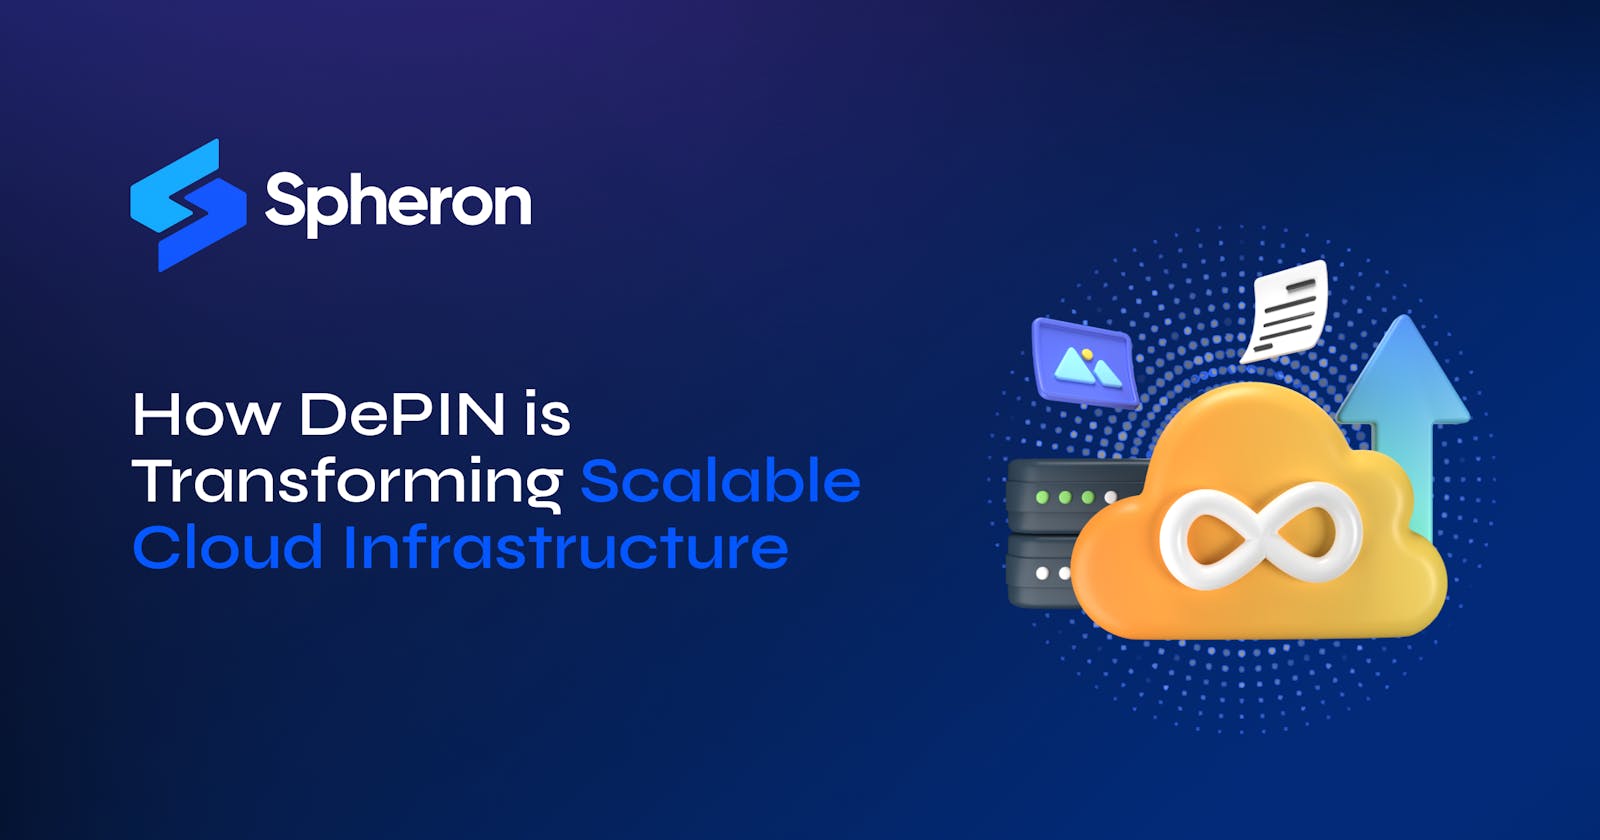 How DePIN is Transforming Scalable Cloud Infrastructure